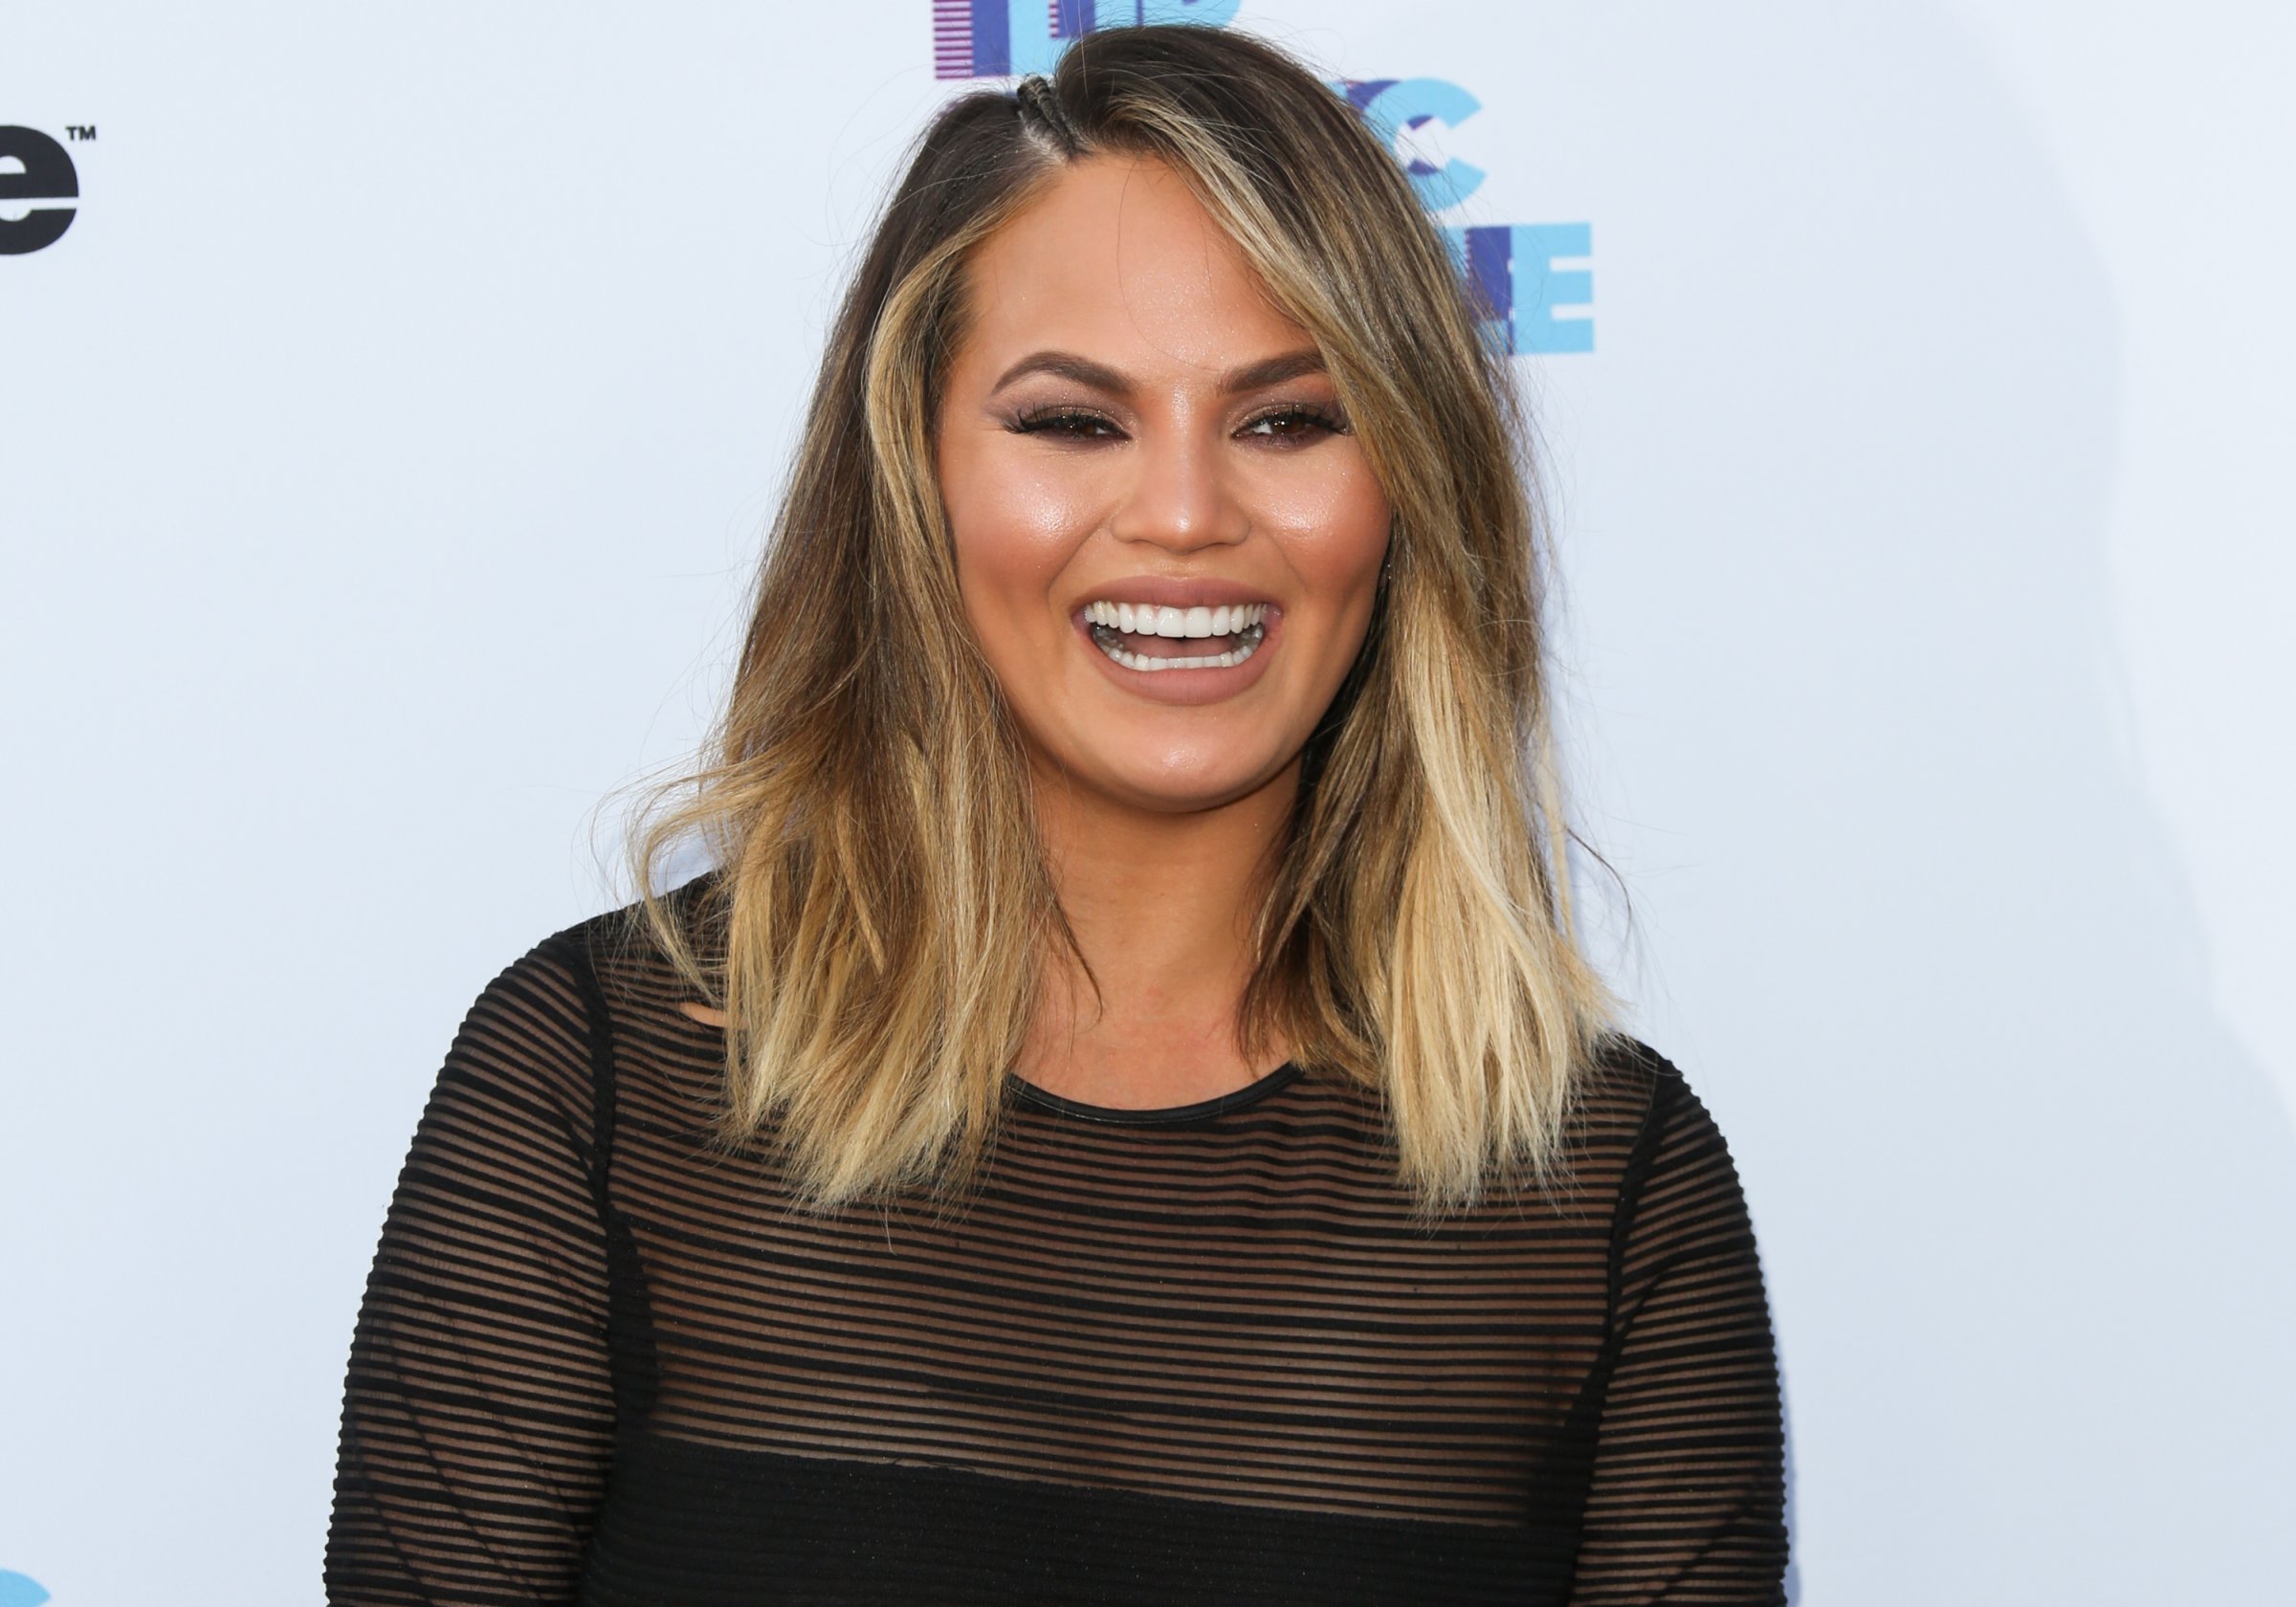 Fashion Model / TV Personality Chrissy Teigen attends the screening of Spike's "Lip Sync Battle" on June 14, 2016 in North Hollywood, California.